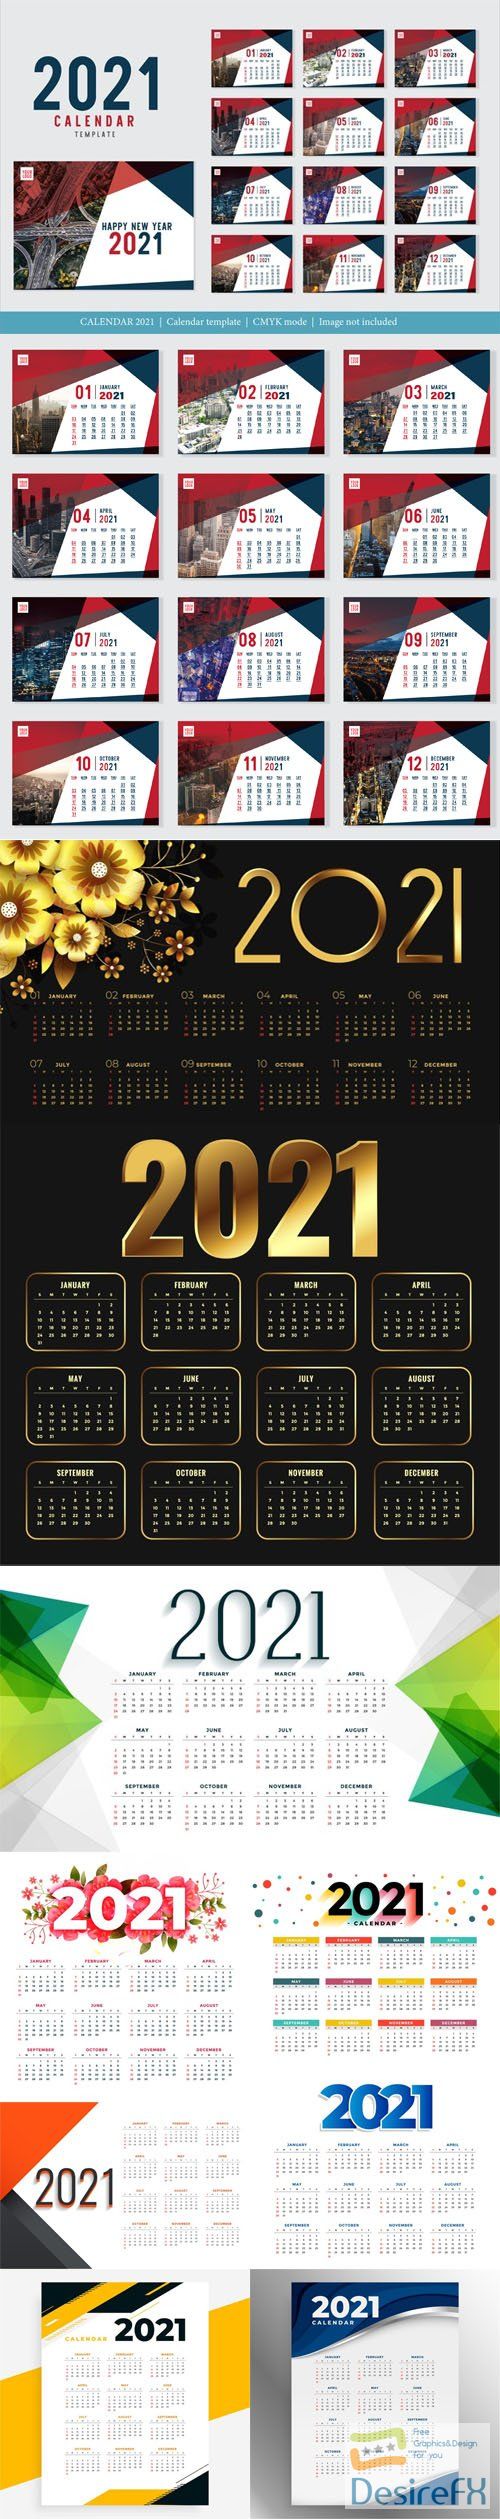 10 Modern New Year 2021 Calendars Collection in Vector